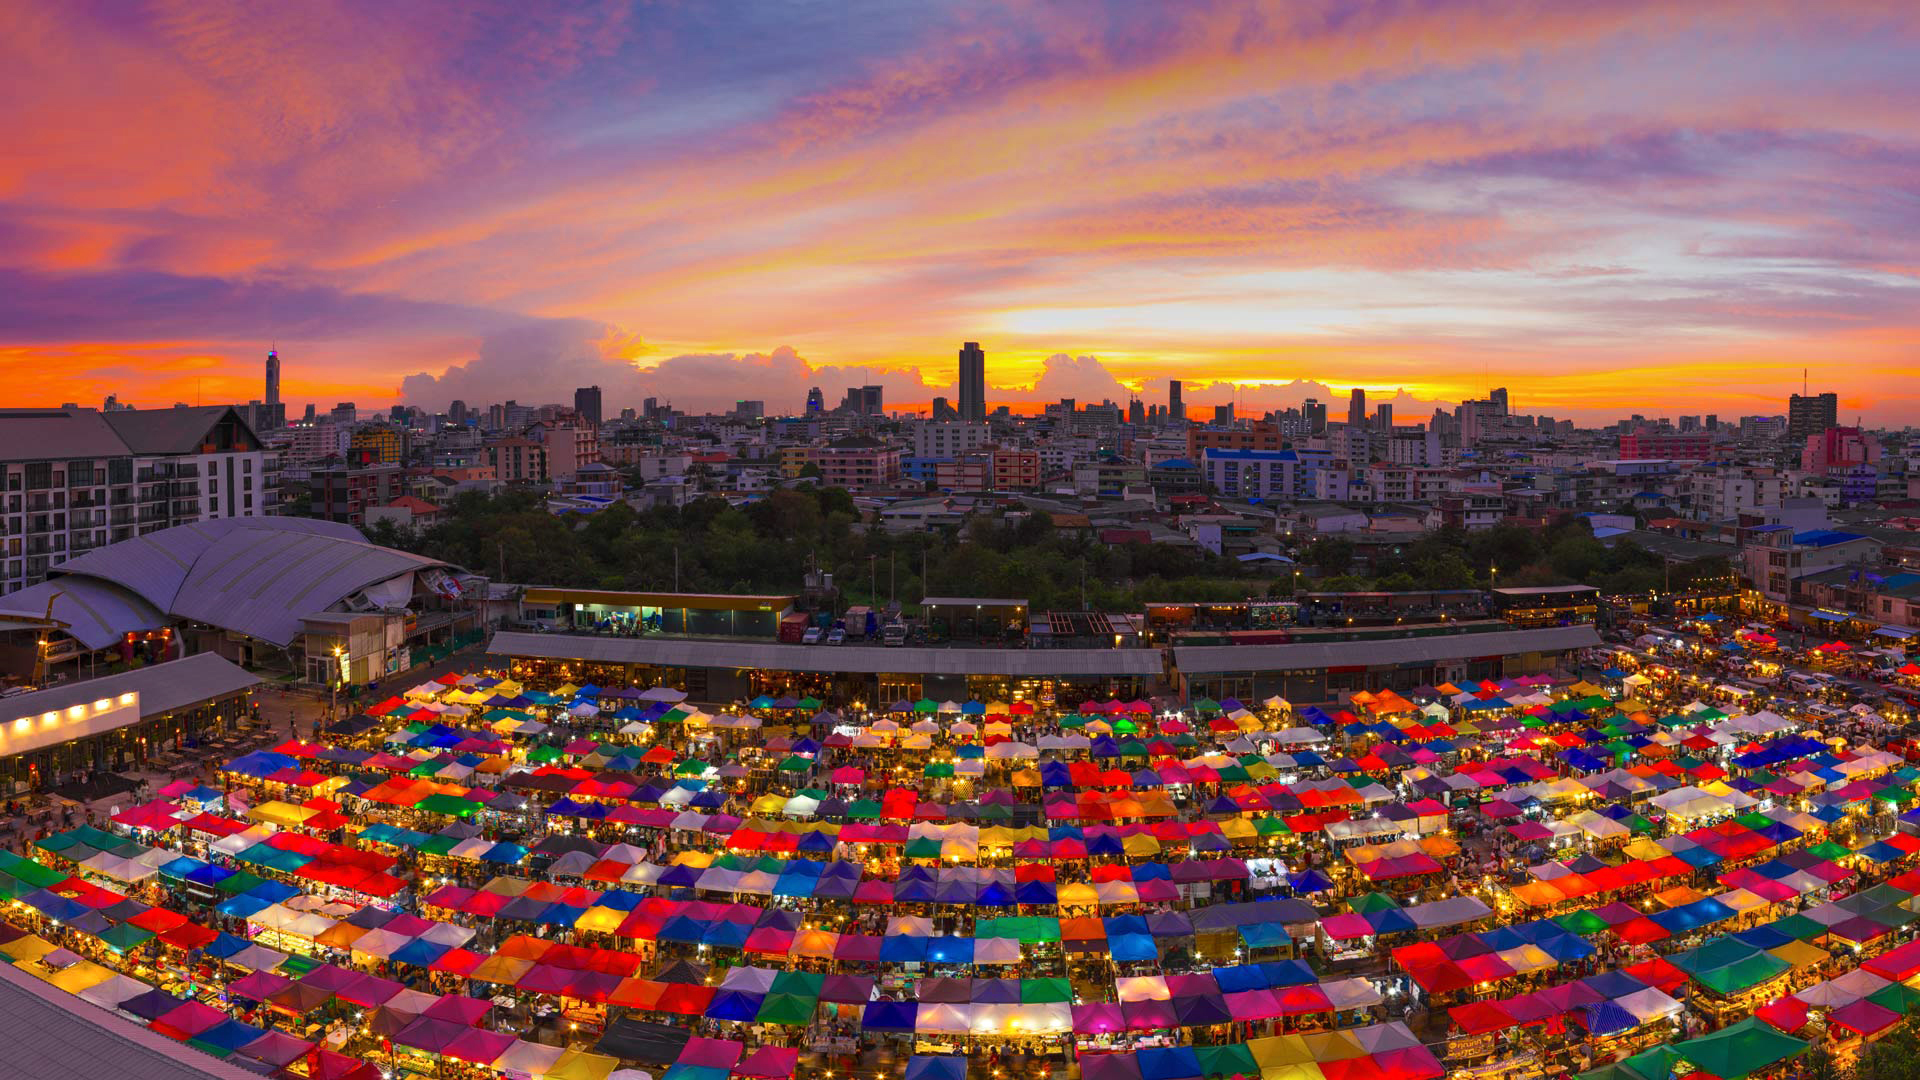 bangkok, man made, building, city, cityscape, colorful, market, sunset, thailand, cities